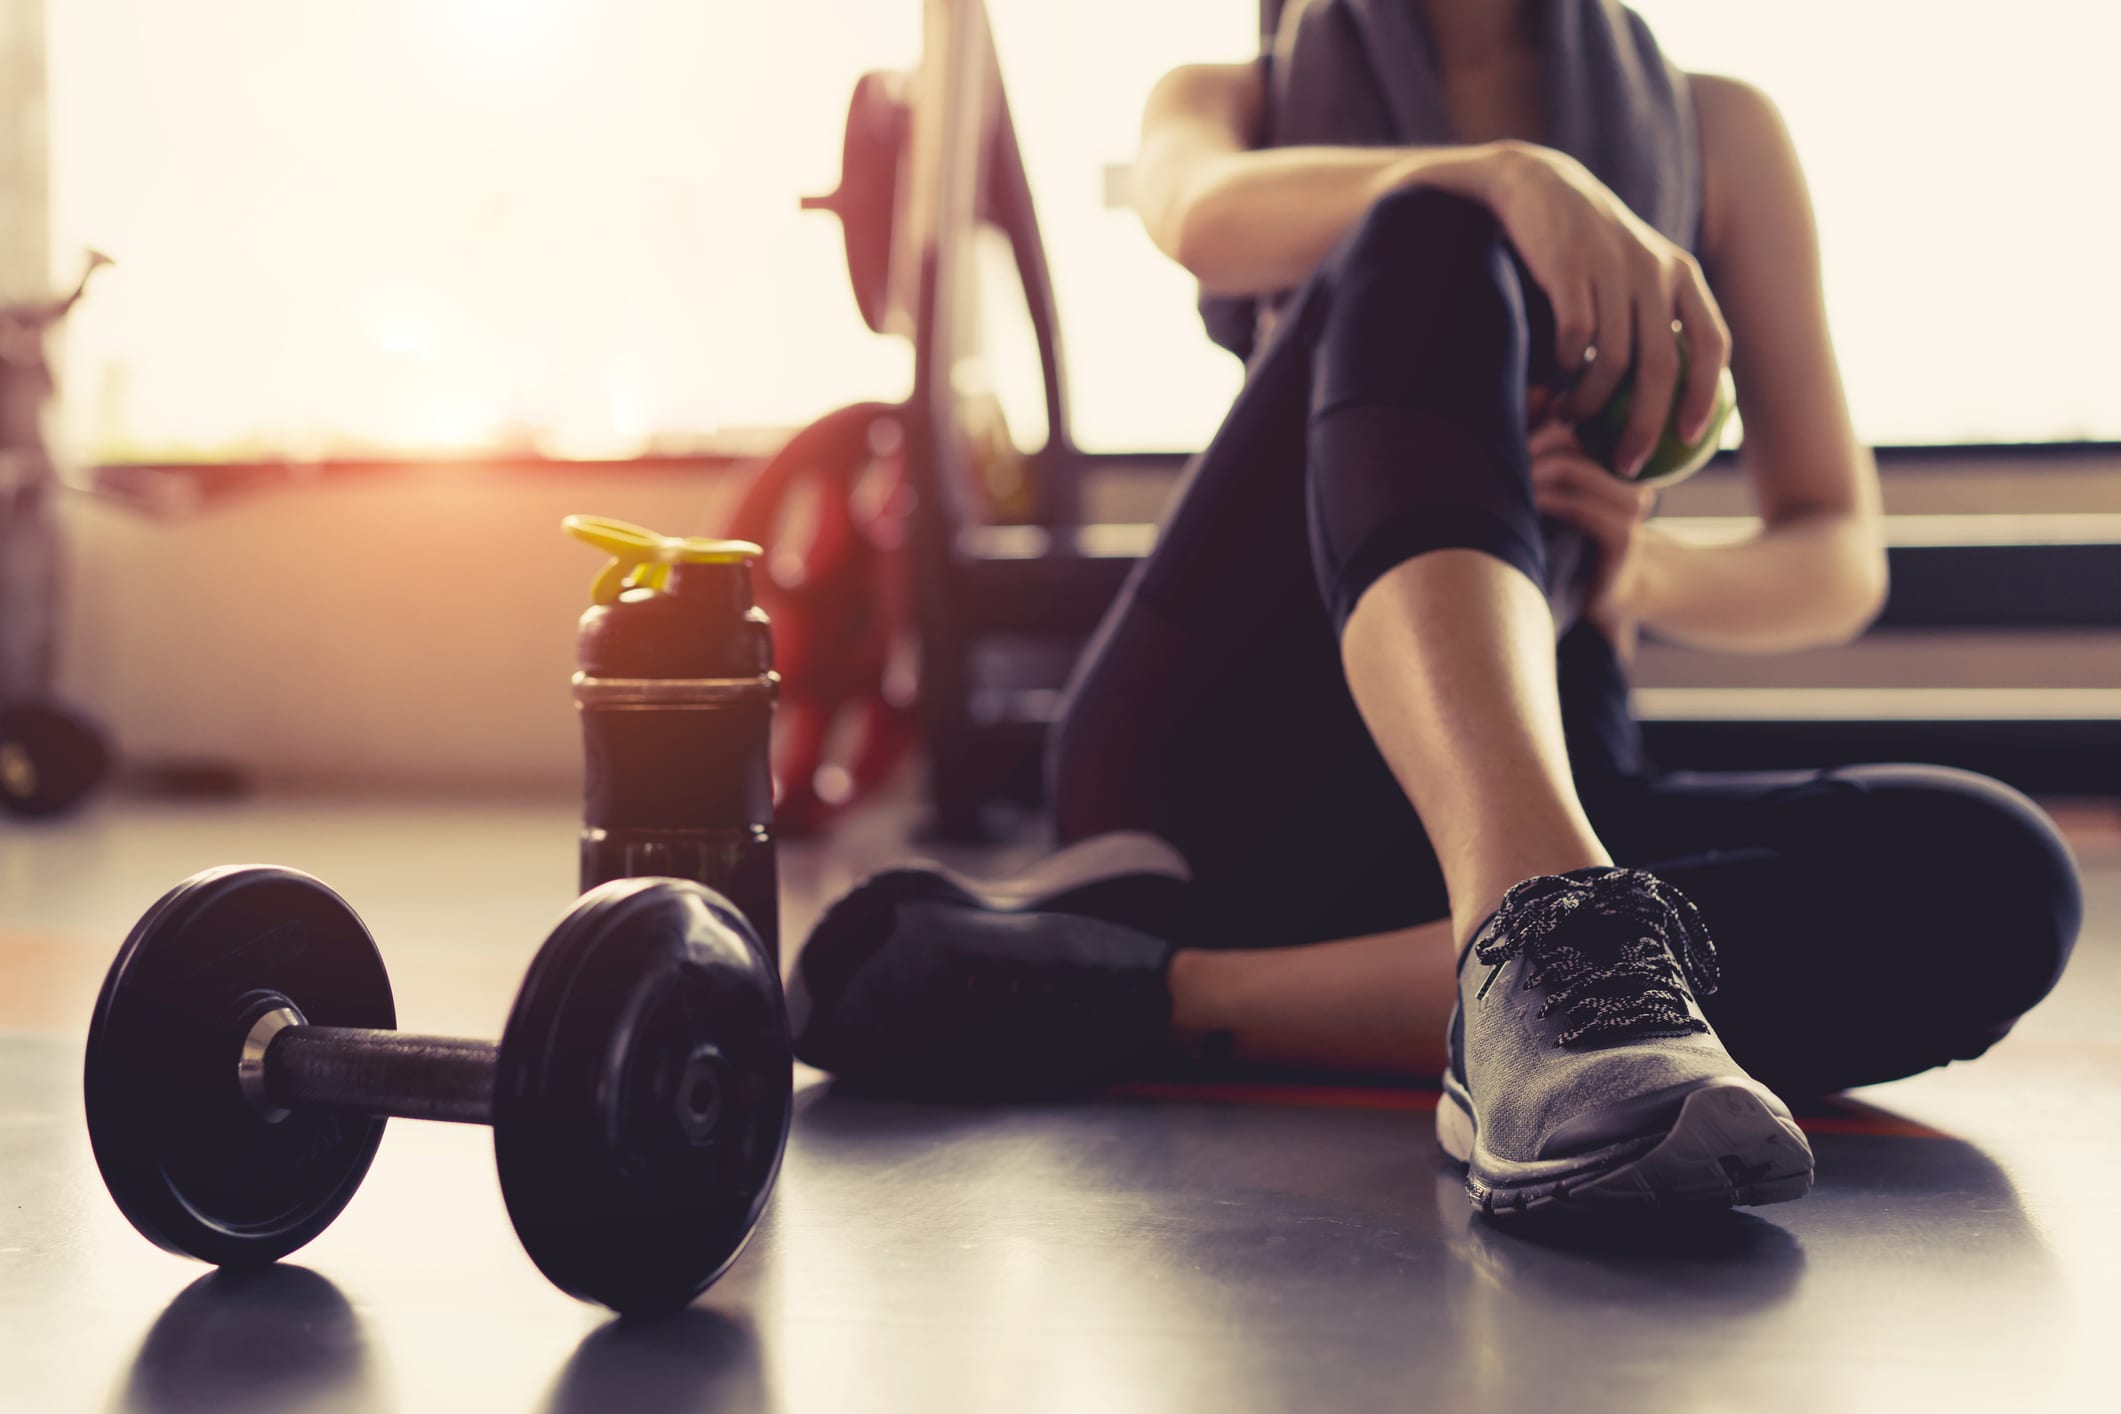 The Top 5 Fitness and Workout Trends for 2020 - FASHION Magazine